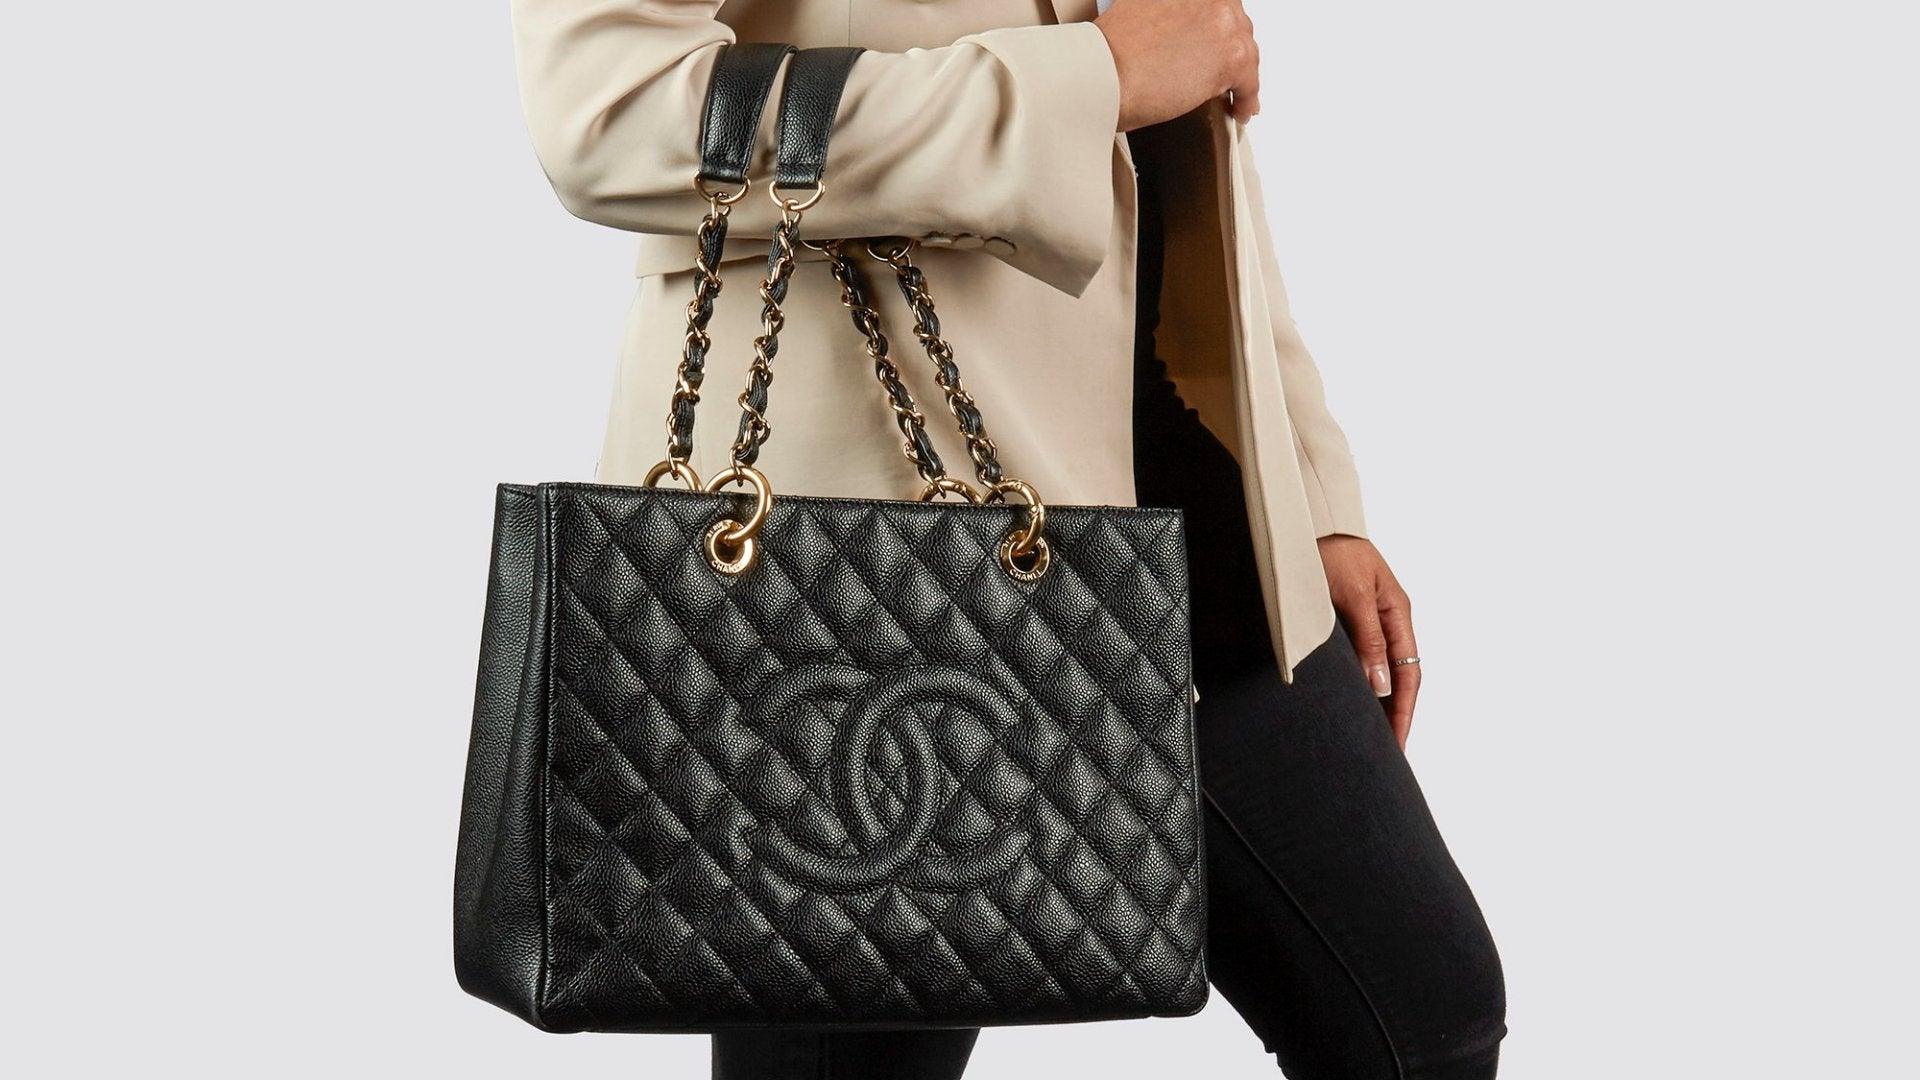 CHANEL TOTE - Only Authentics